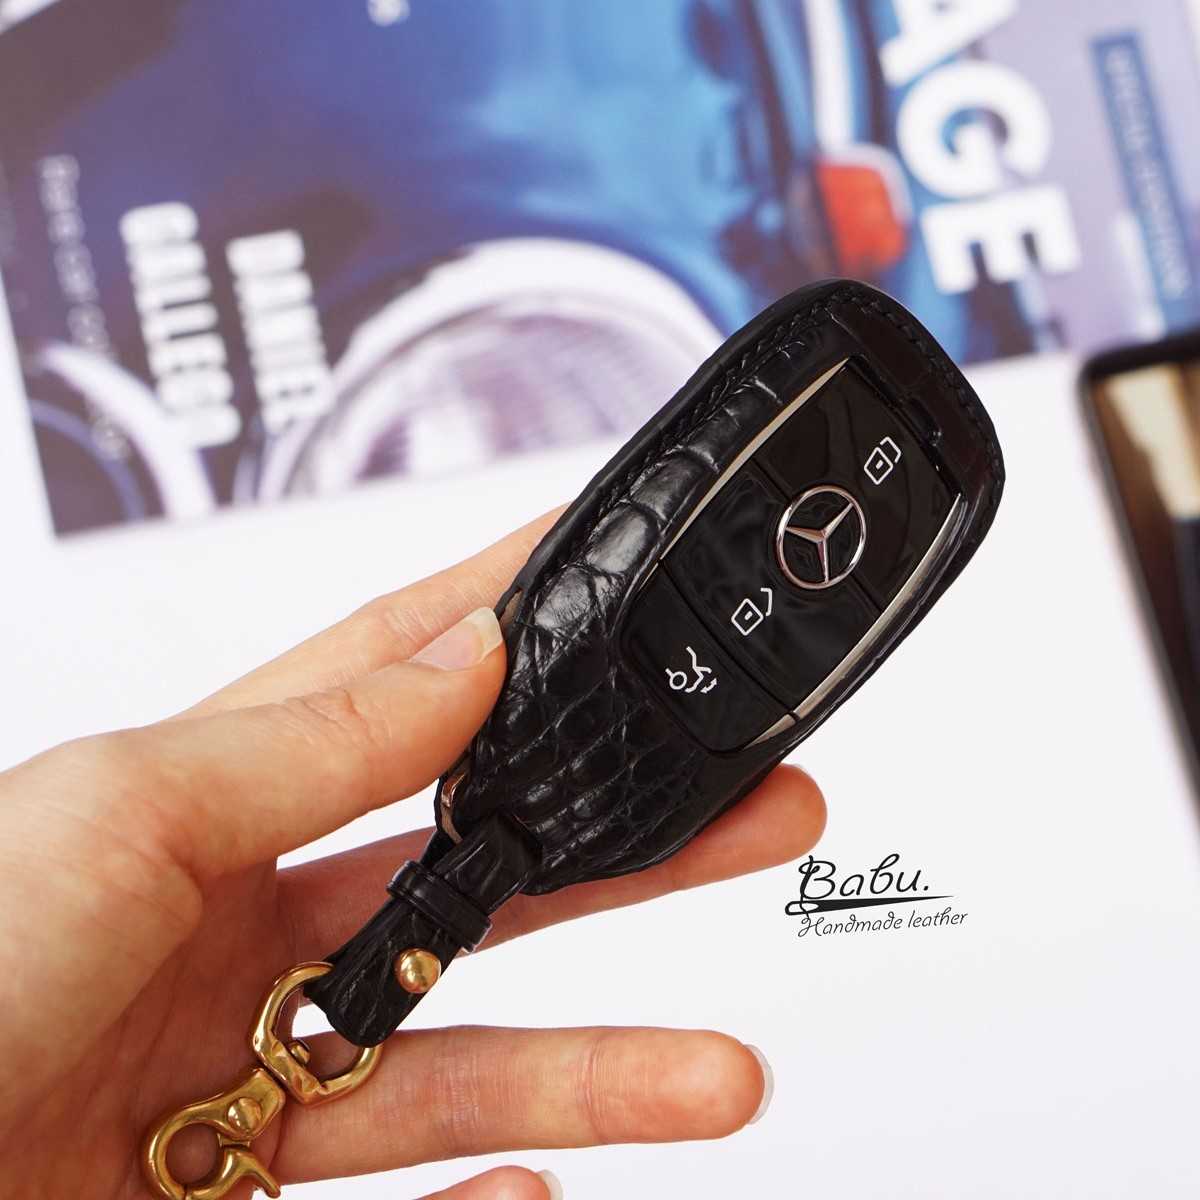 https://babuhandmadeleather.com/wp-content/uploads/2022/11/Mercedes-Benz-Key-Leather-Fob-Cover-1.jpg